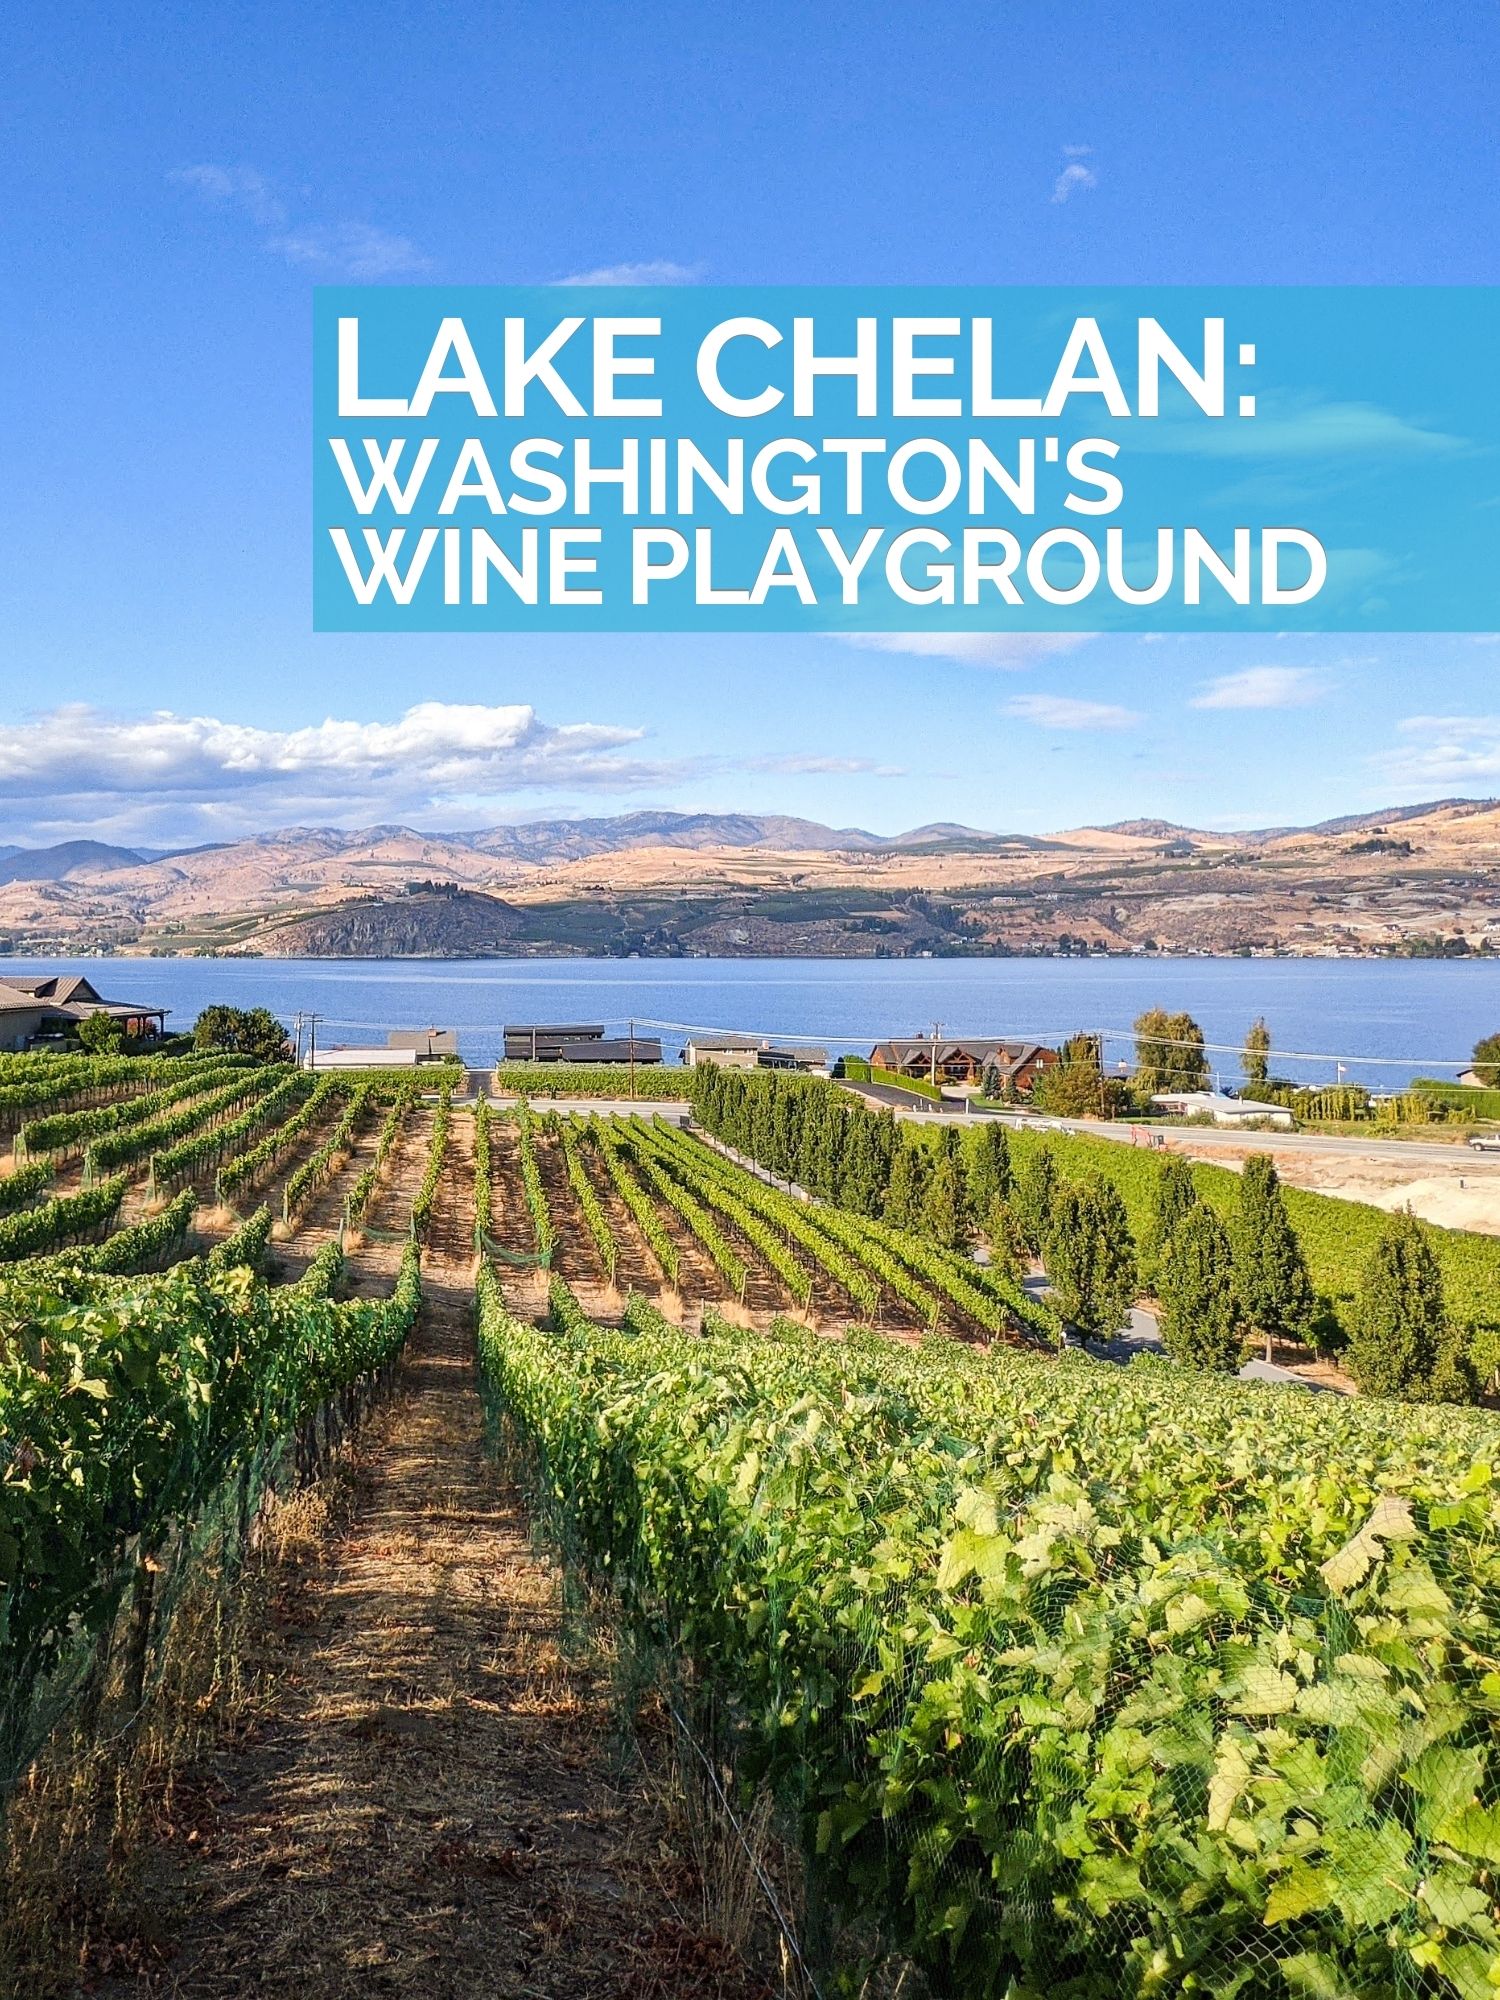 With so many things to do at Lake Chelan, it's no wonder this part of Washington Wine Country is so popular with locals. Wine tasting, hiking, boating and more, plan a fun vacation to Washington's year-round playground.